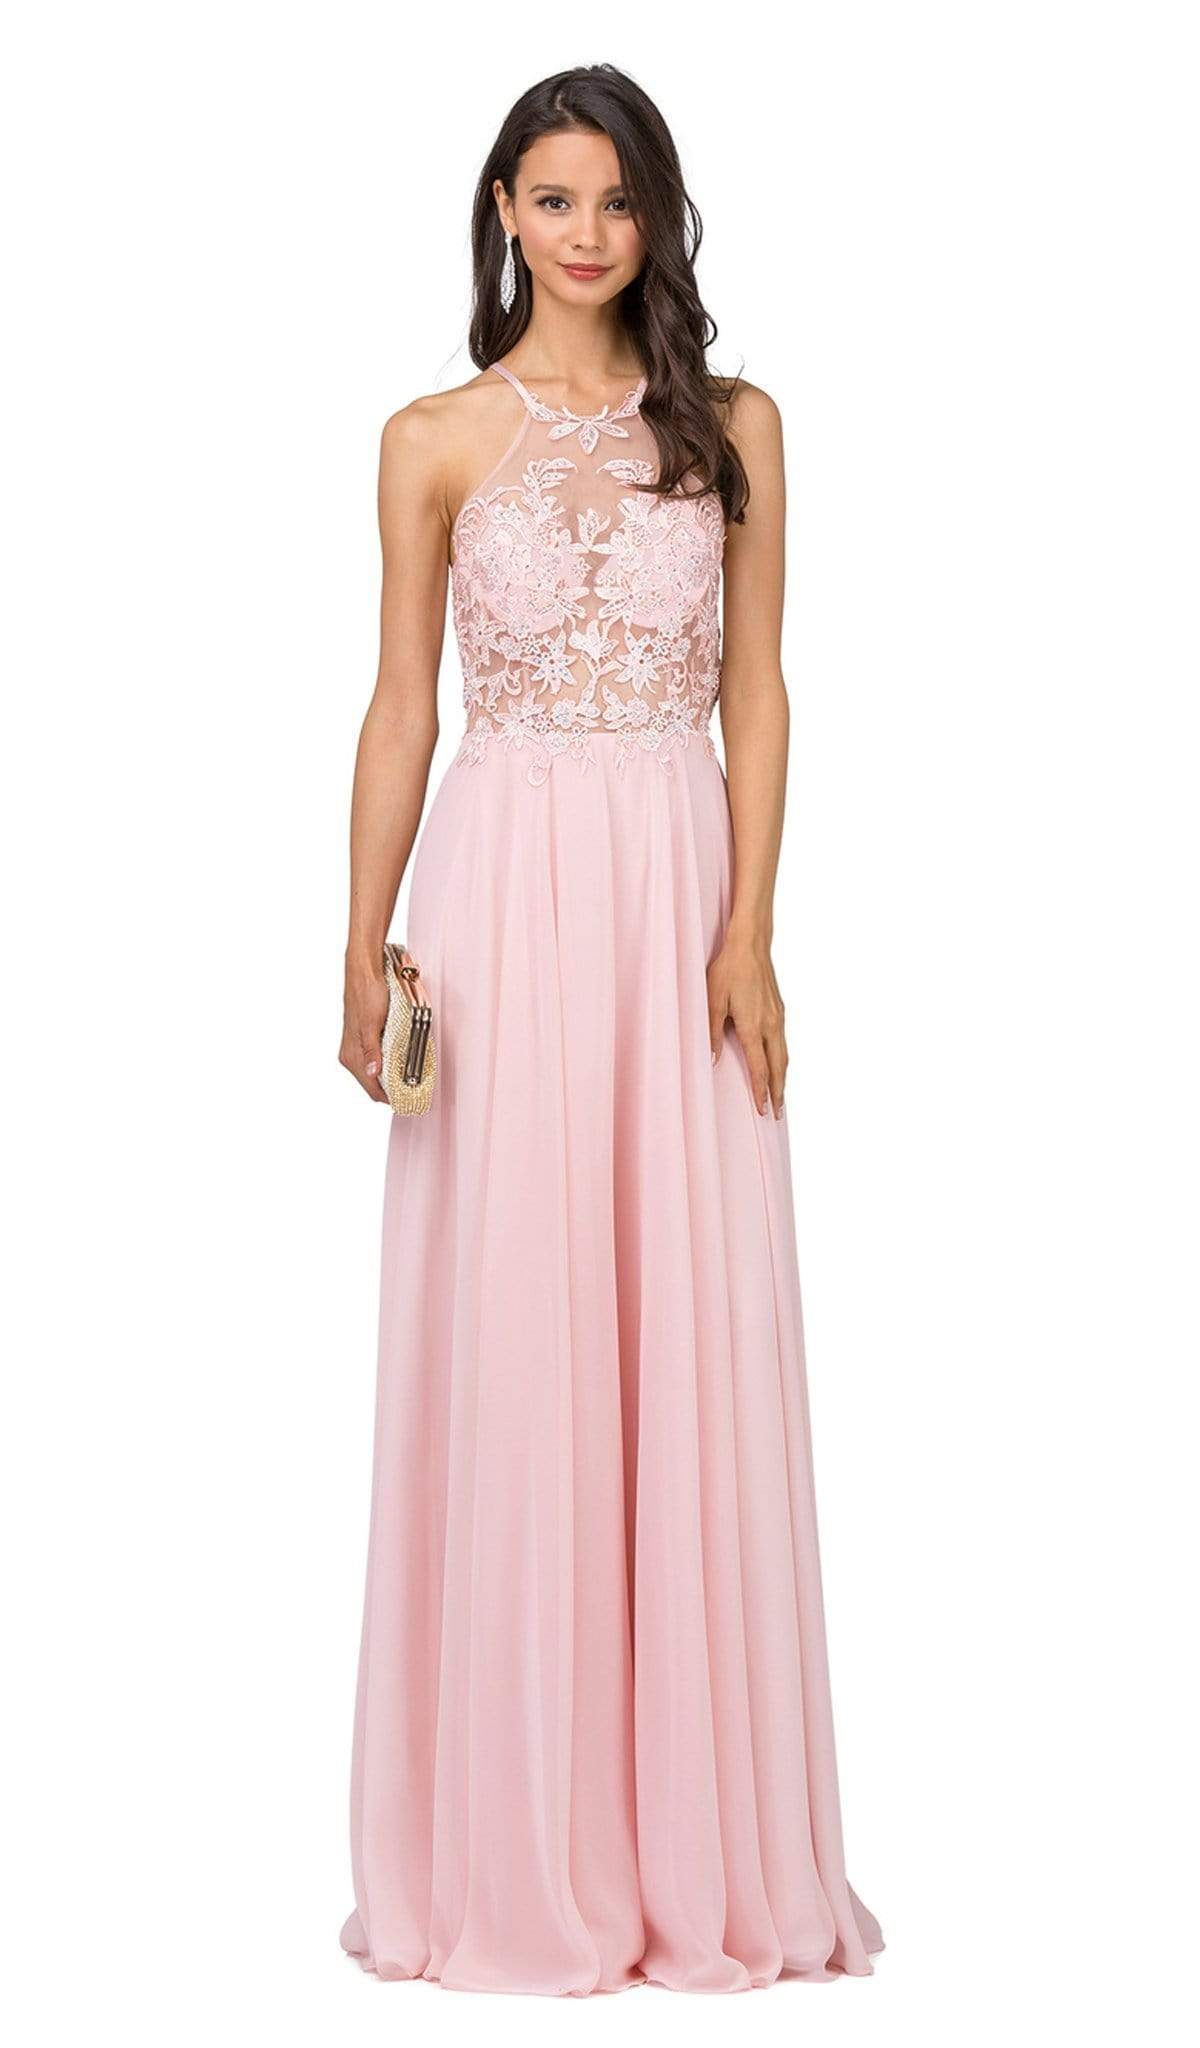 Dancing Queen - 2369 Embroidered Sheer Halter Chiffon Prom Dress Special Occasion Dress XS / Blush